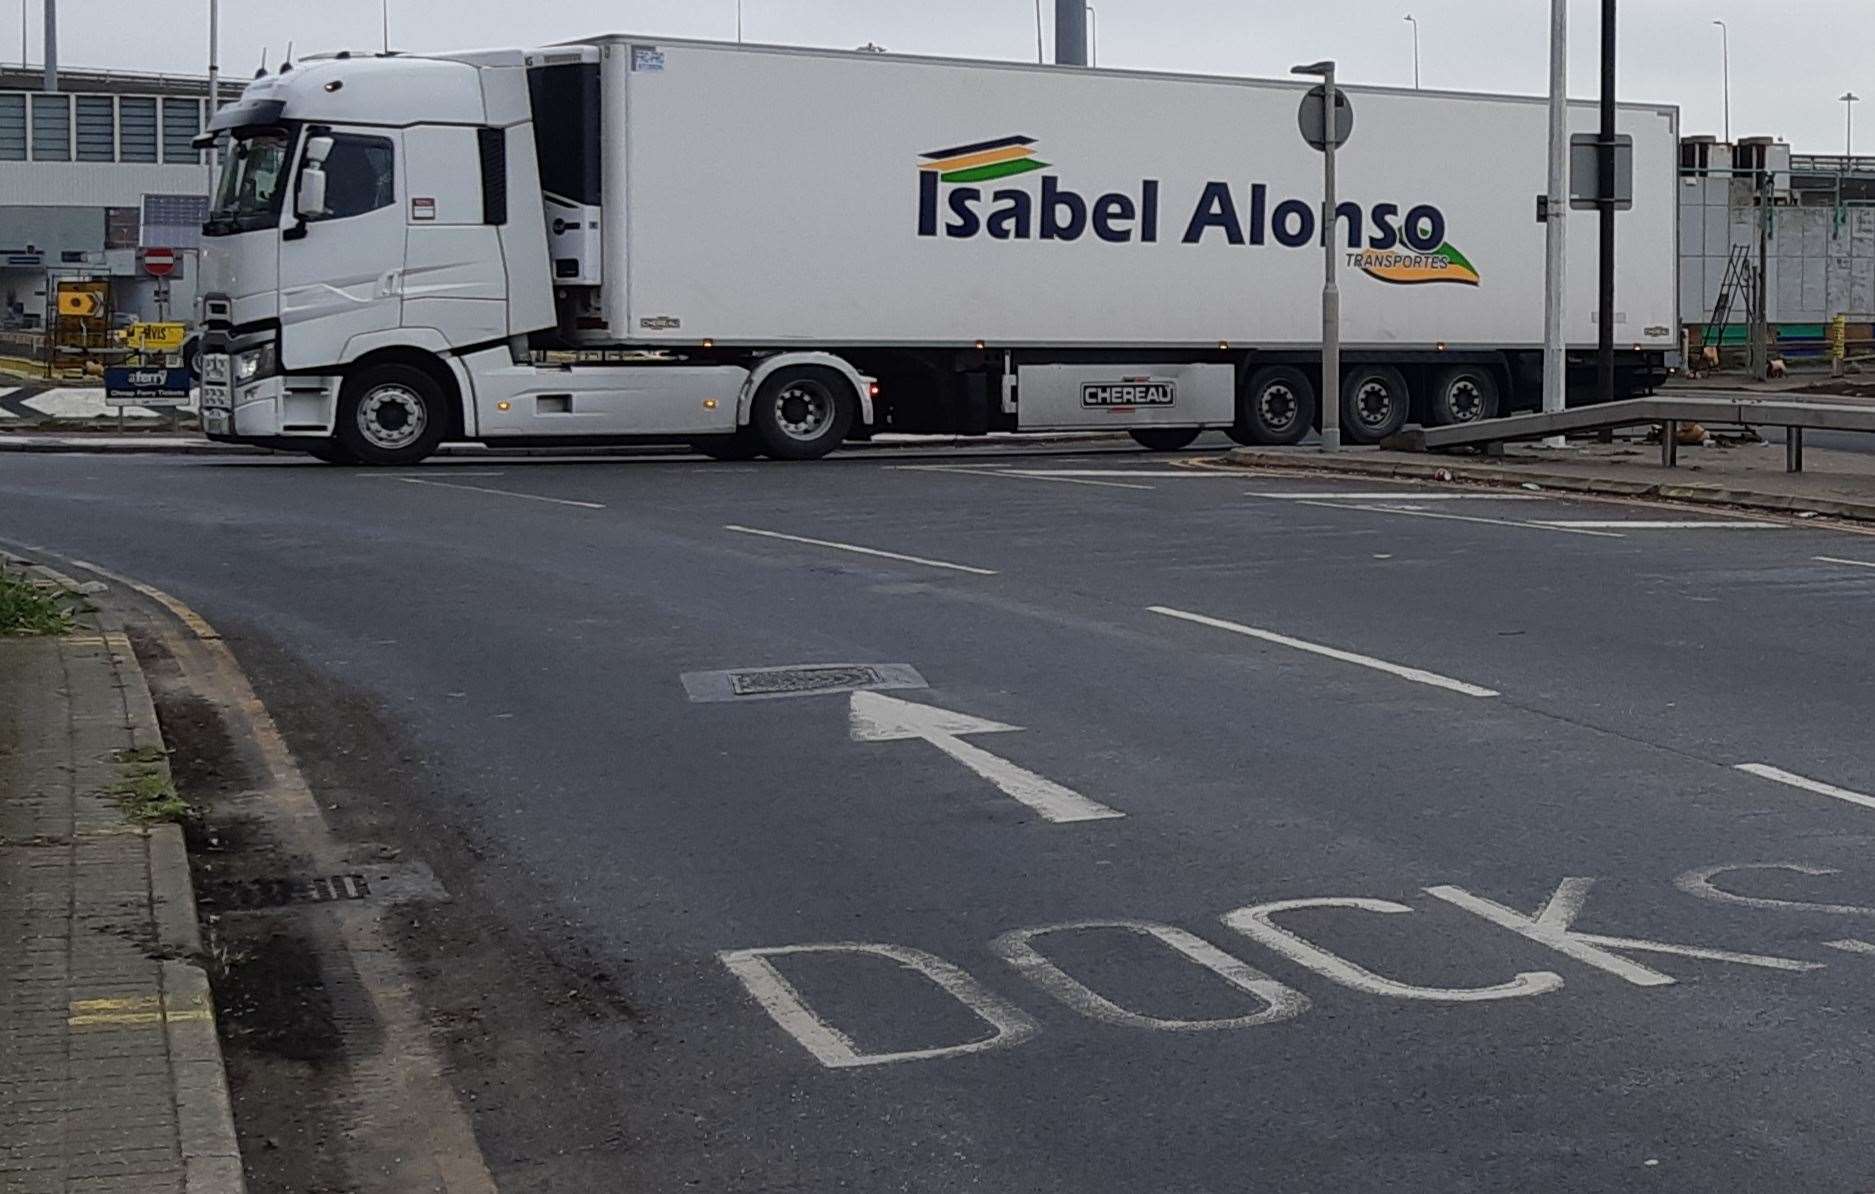 Lorry drivers coming to places such as Dover docks need a permit to enter Kent